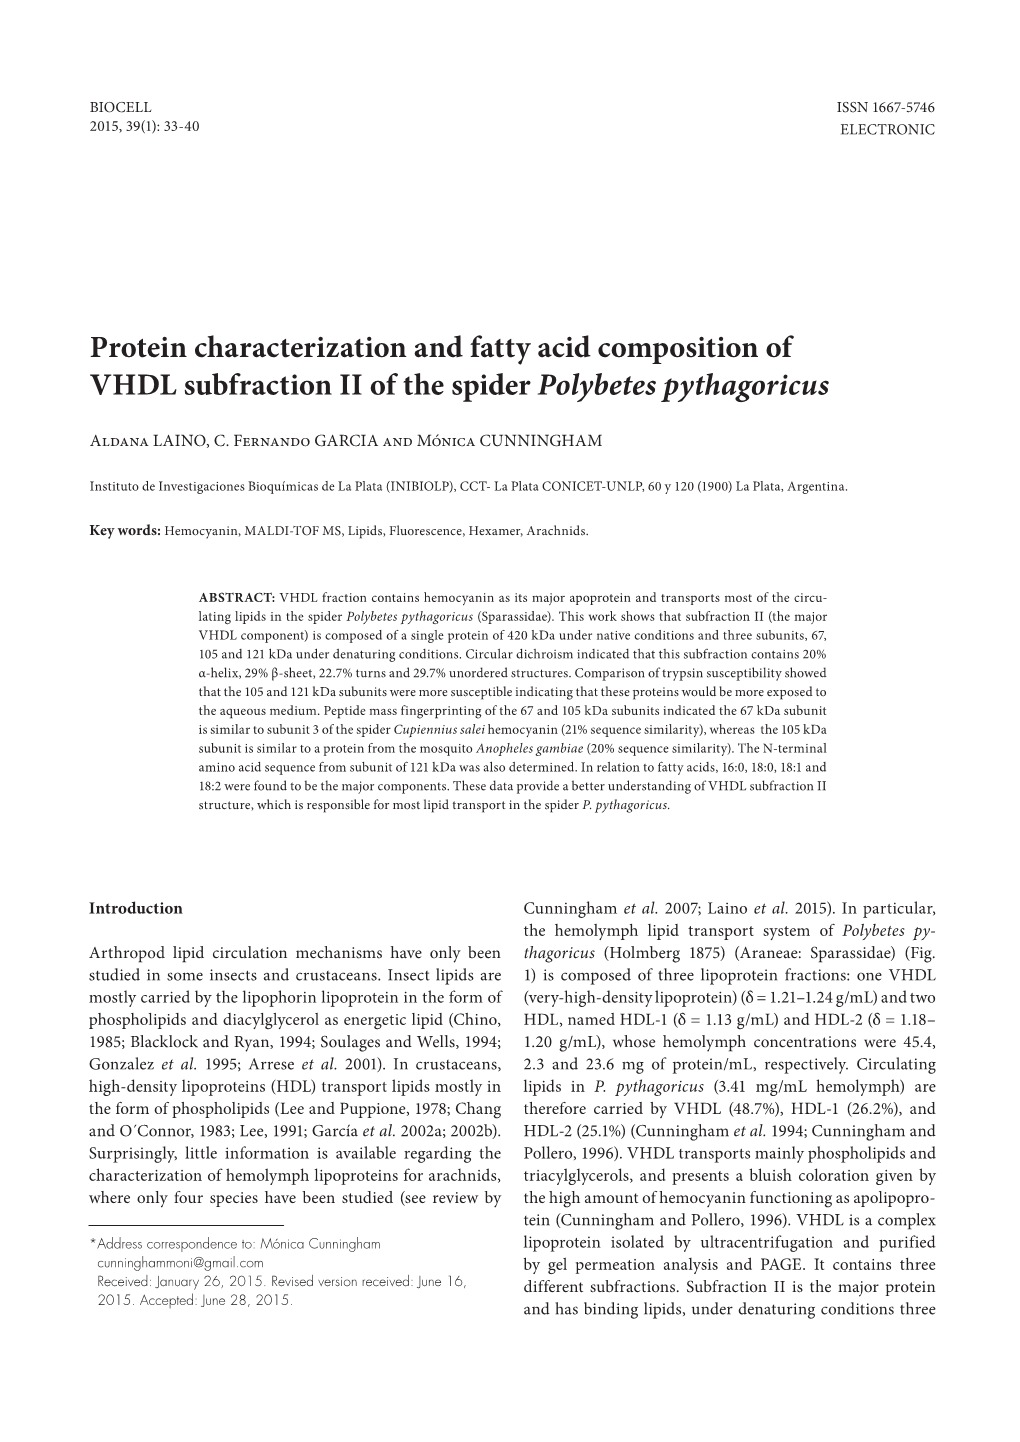 Protein Characterization and Fatty Acid Composition of VHDL Subfraction II of the Spider Polybetes Pythagoricus